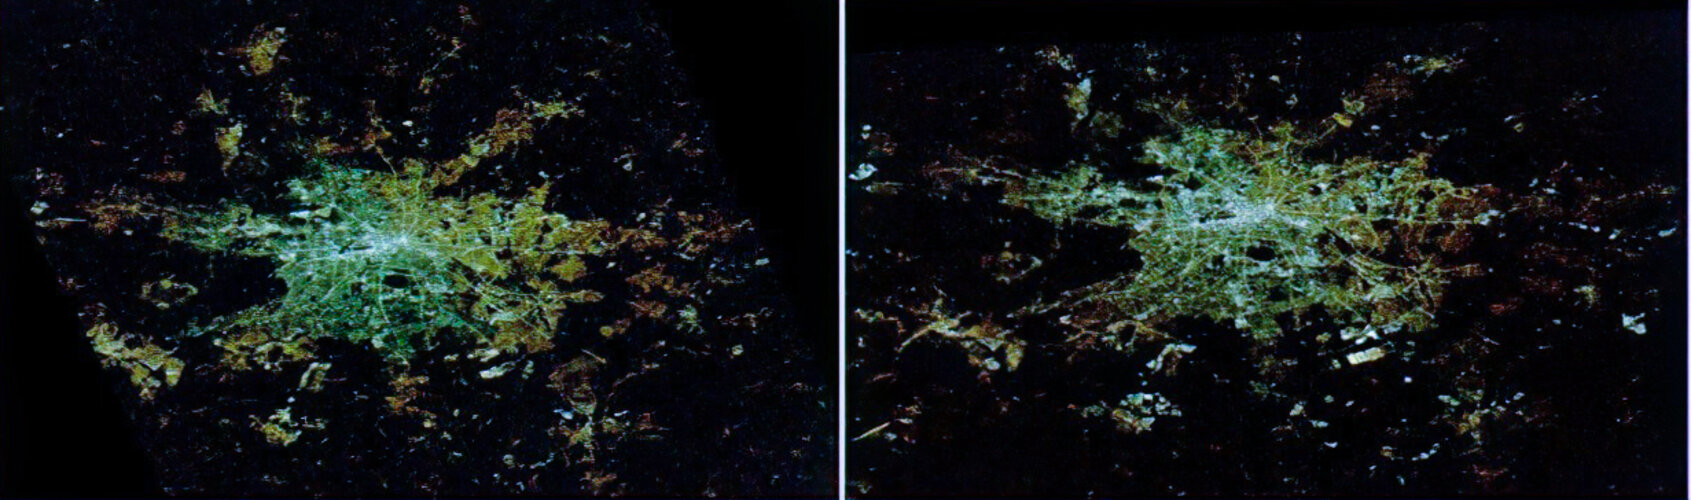 Berlin at night – A decade of changes in street lighting